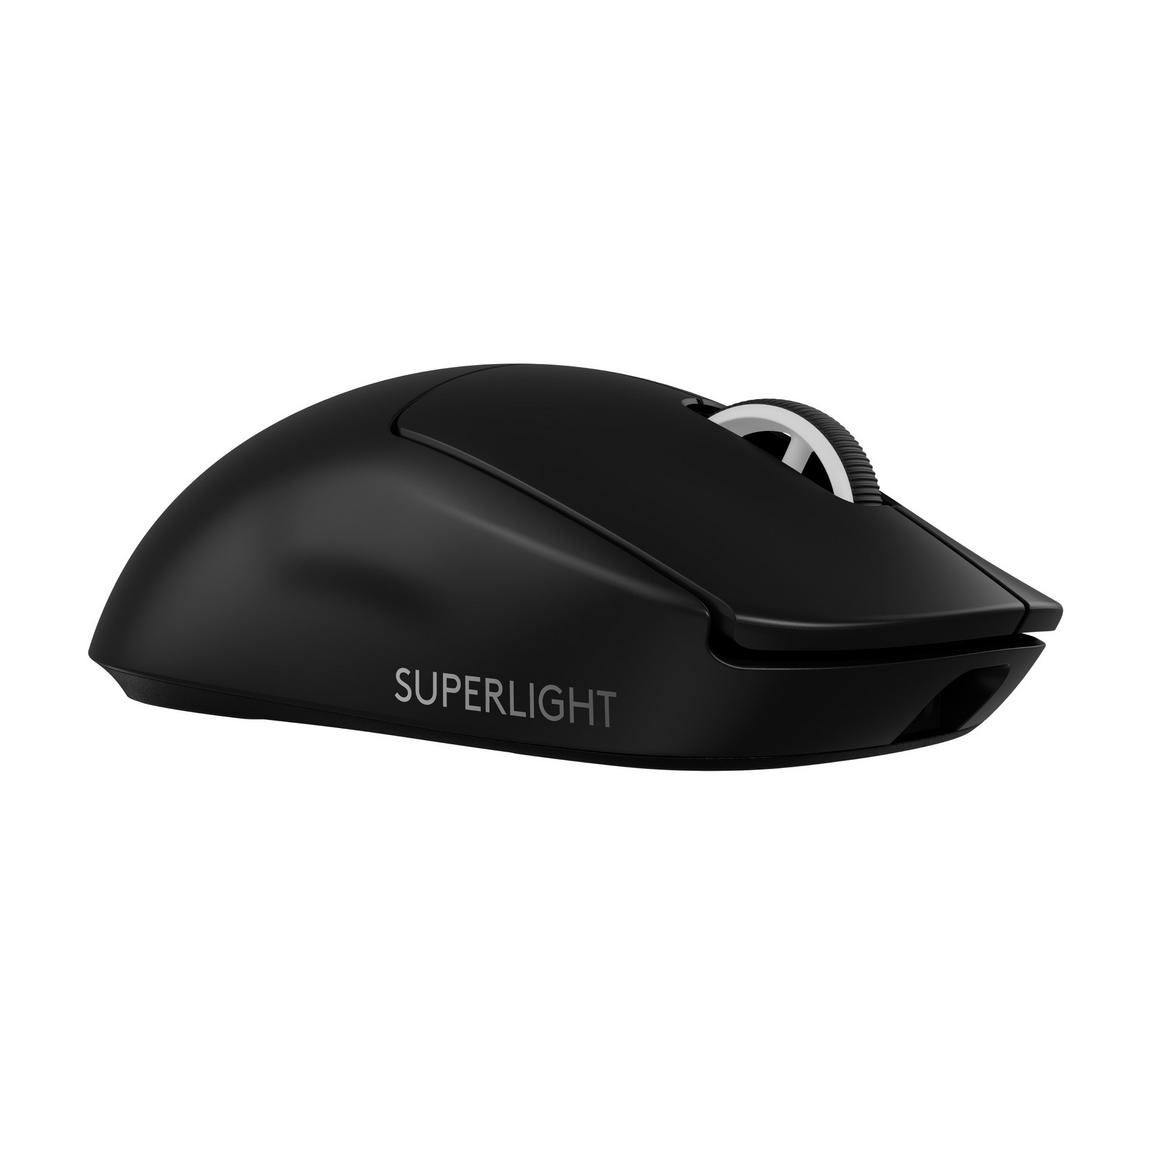 Logitech G PRO X SUPERLIGHT 2 LIGHTSPEED Wireless Gaming Mouse with LIGHTFORCE Hybrid Switches for PC and Mac - Black